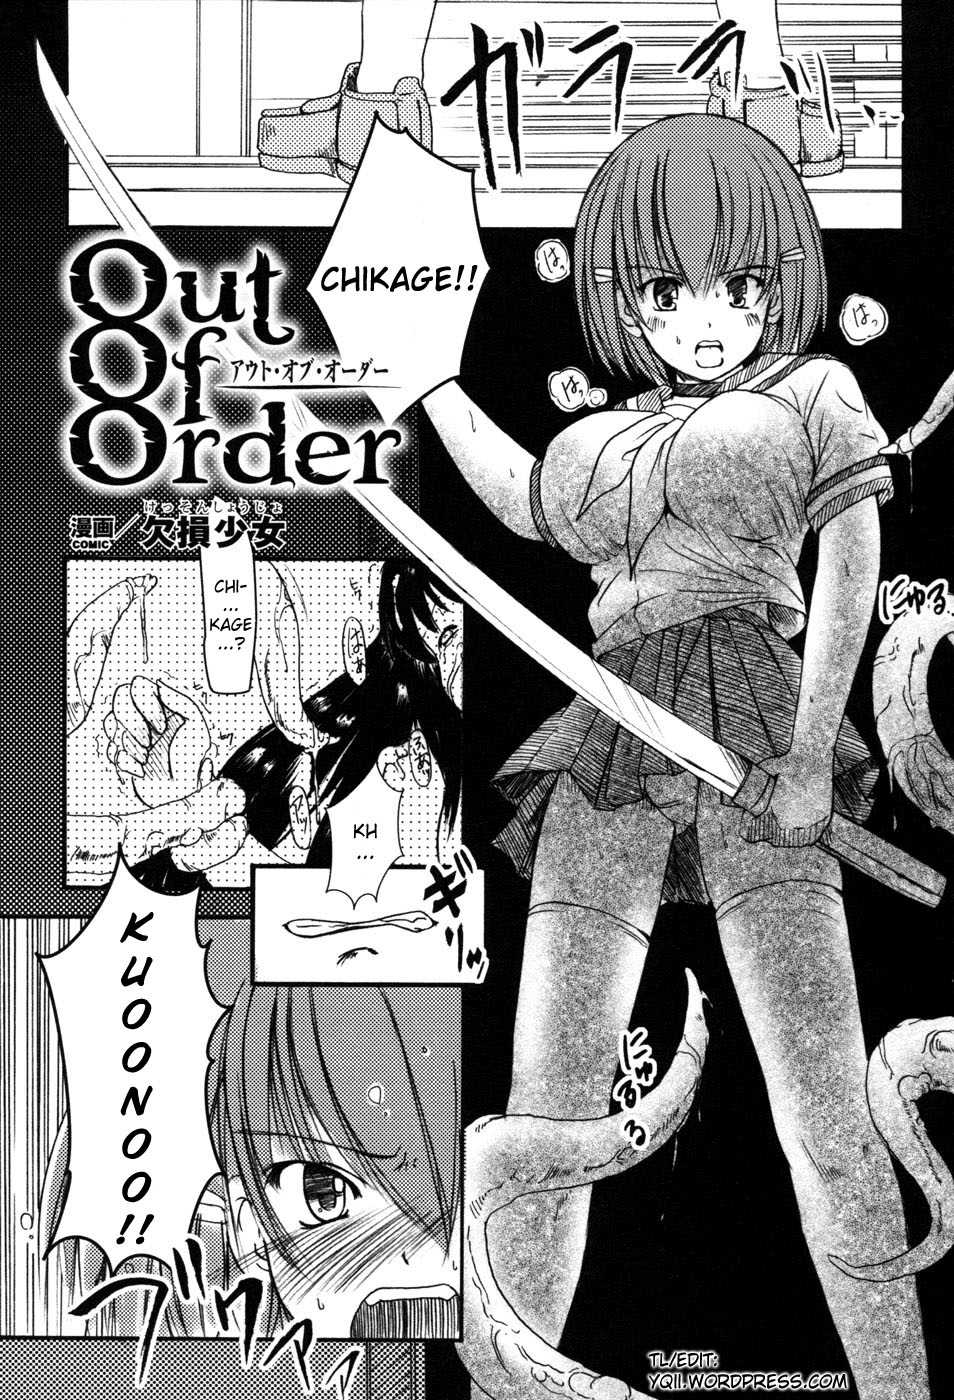 [Kesson Shoujo] Out of Order [English] [欠損少女] Out of Order アウト・オブ・オーダー [英訳]